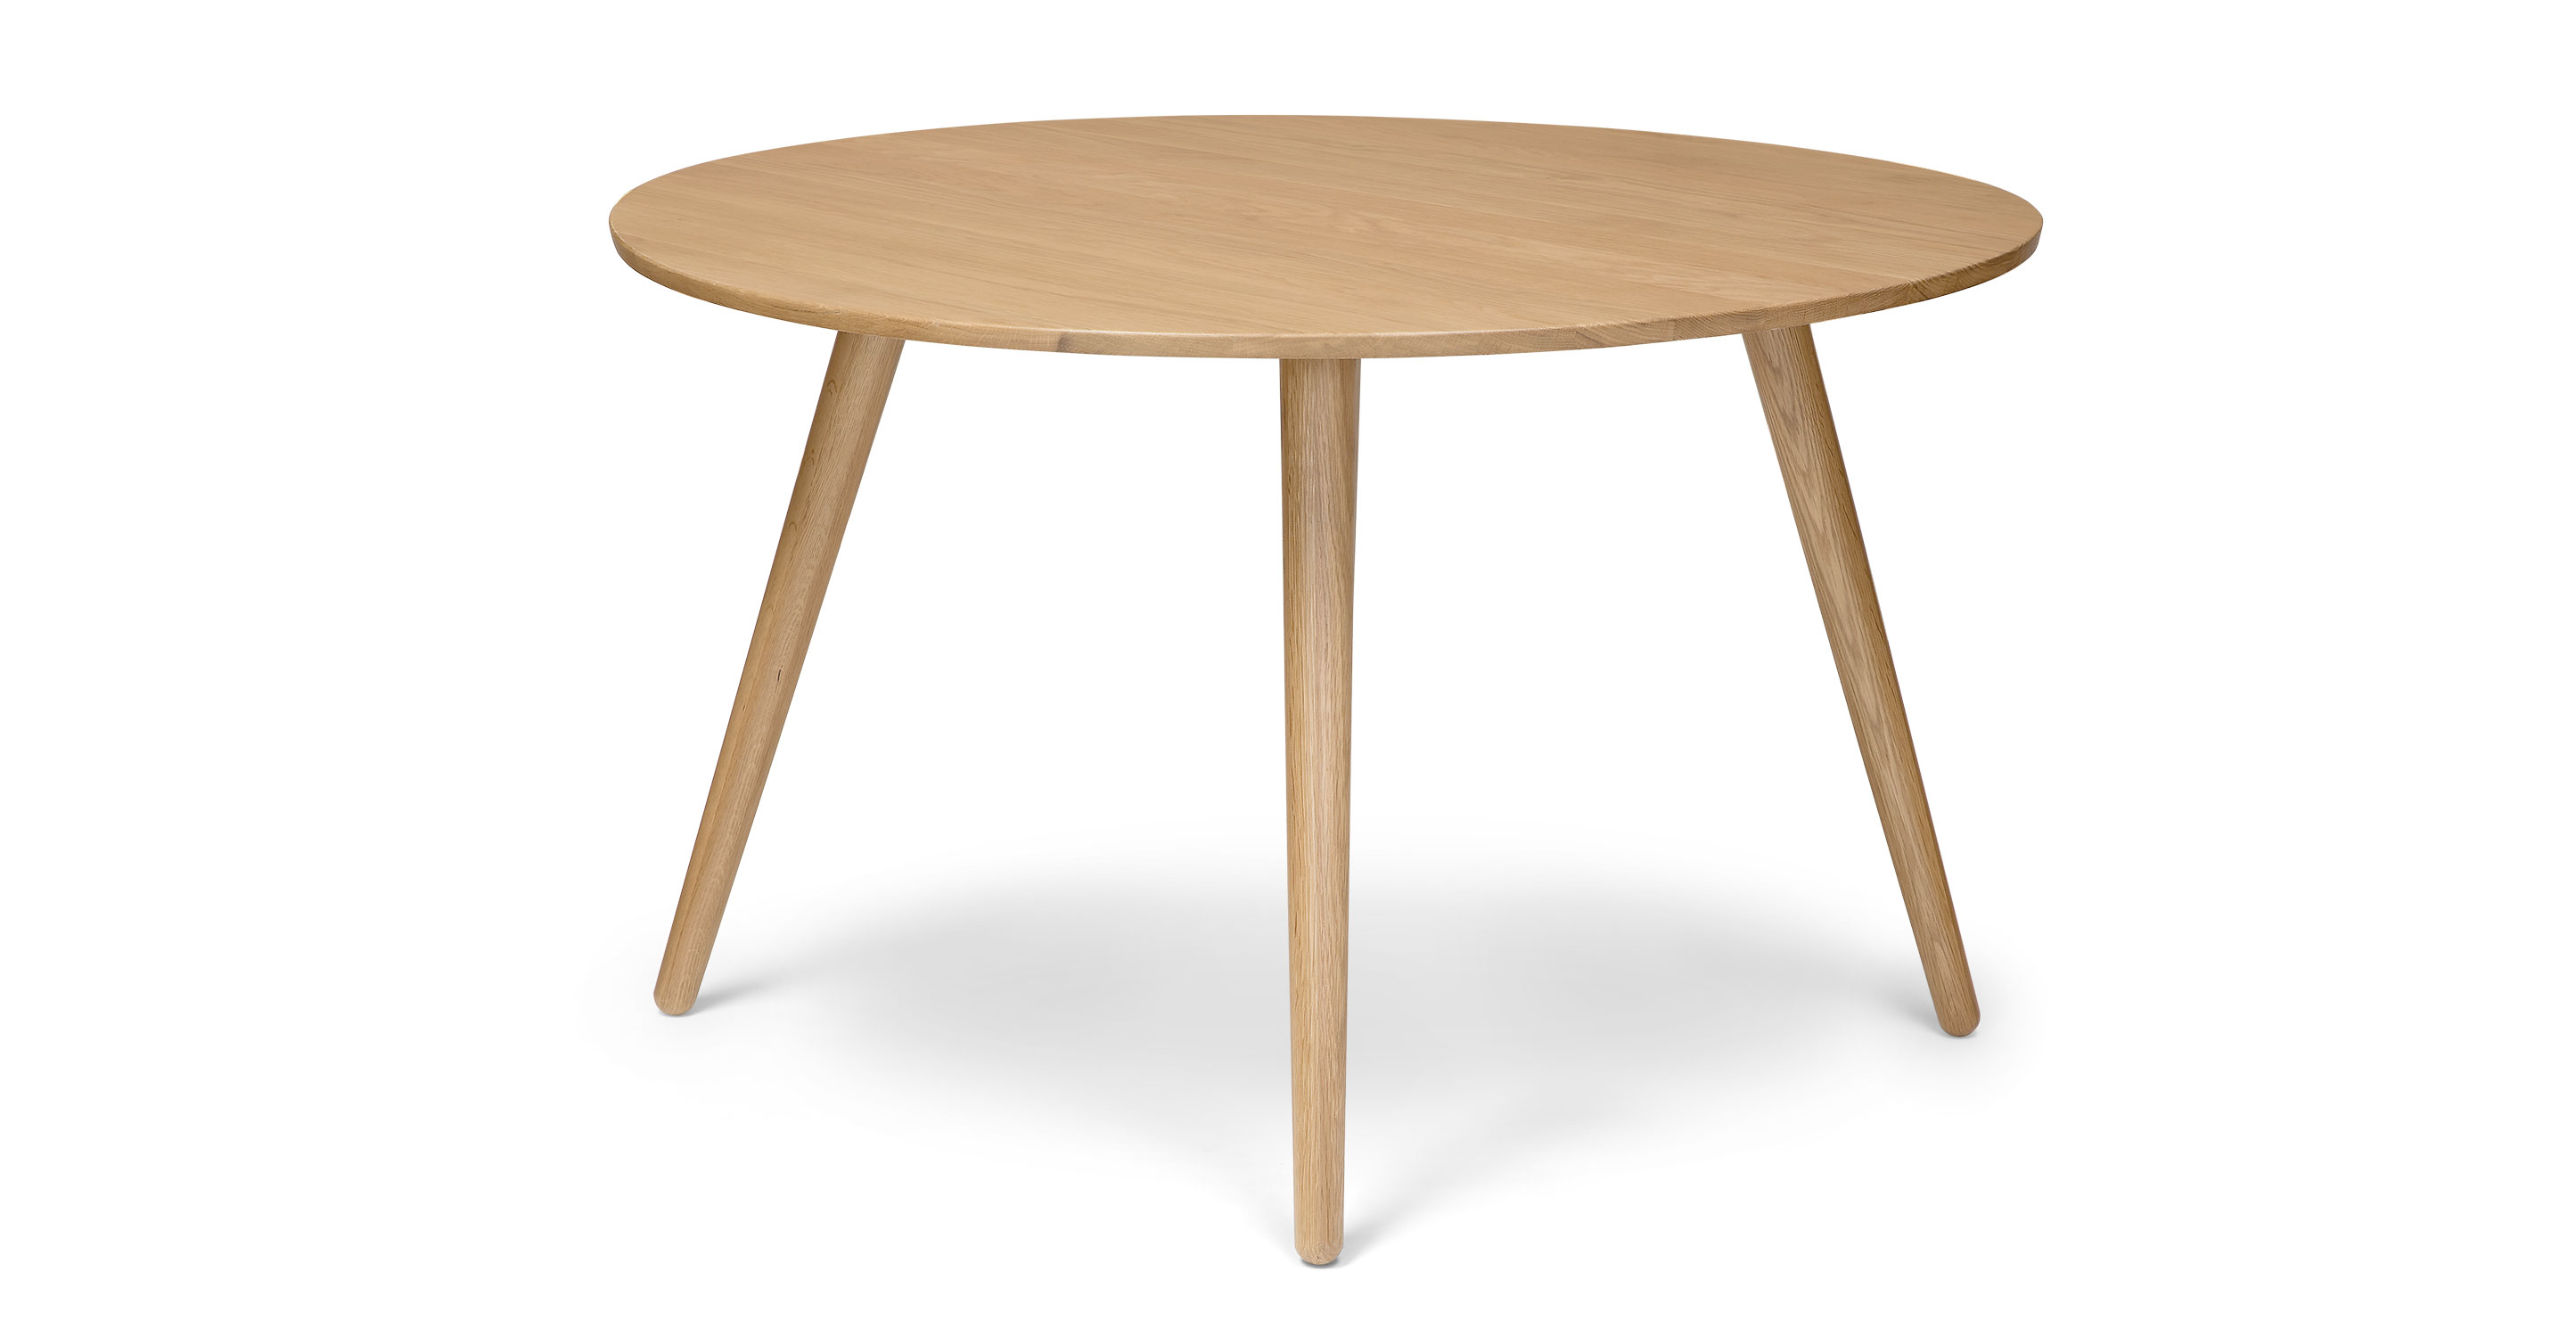 Round Oak Wood Dining Table For 4, How Many Chairs Fit Around A 47 Inch Table